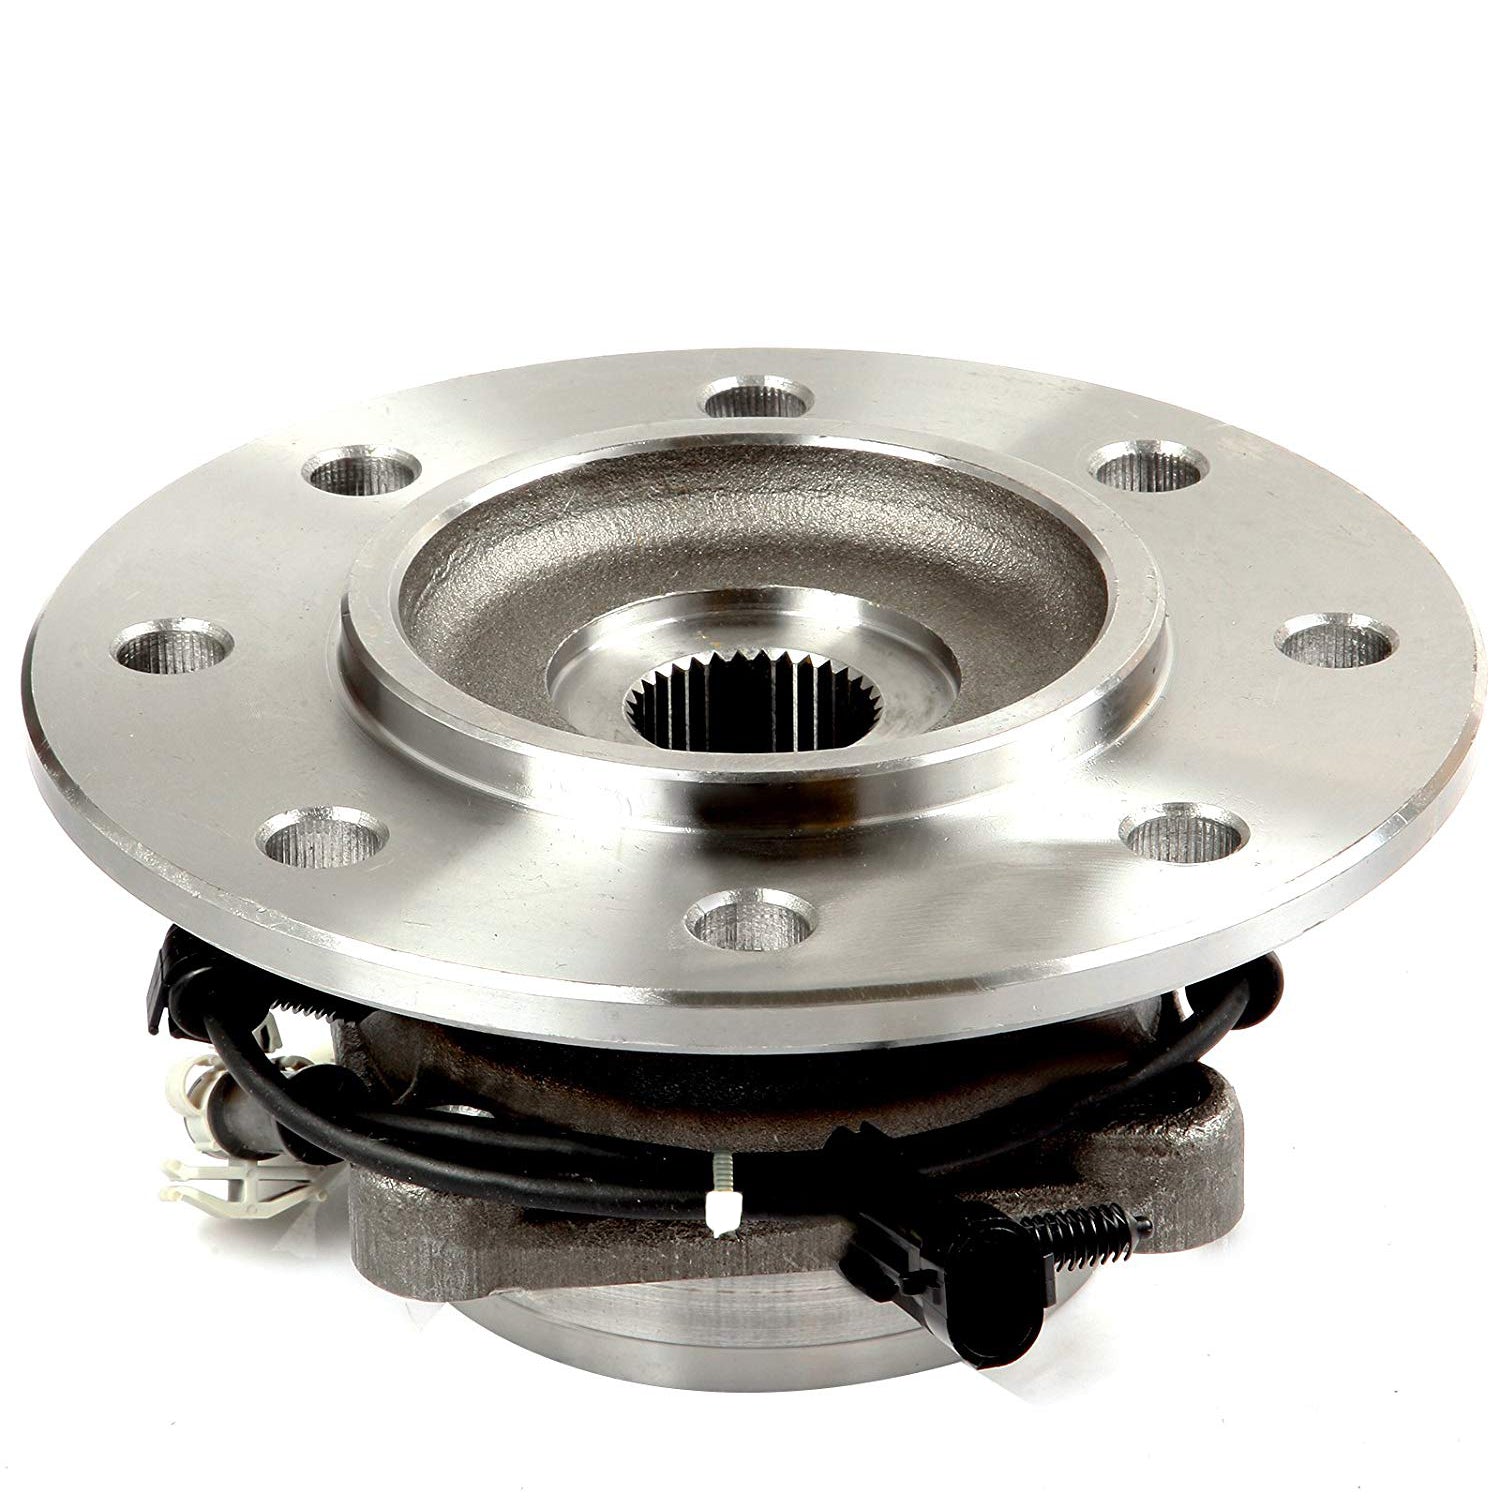 JADODE 515041 4WD Front Wheel Hub & Bearing Assembly For 1996-2000 Chevy GMC K2500 K3500 8 Lug